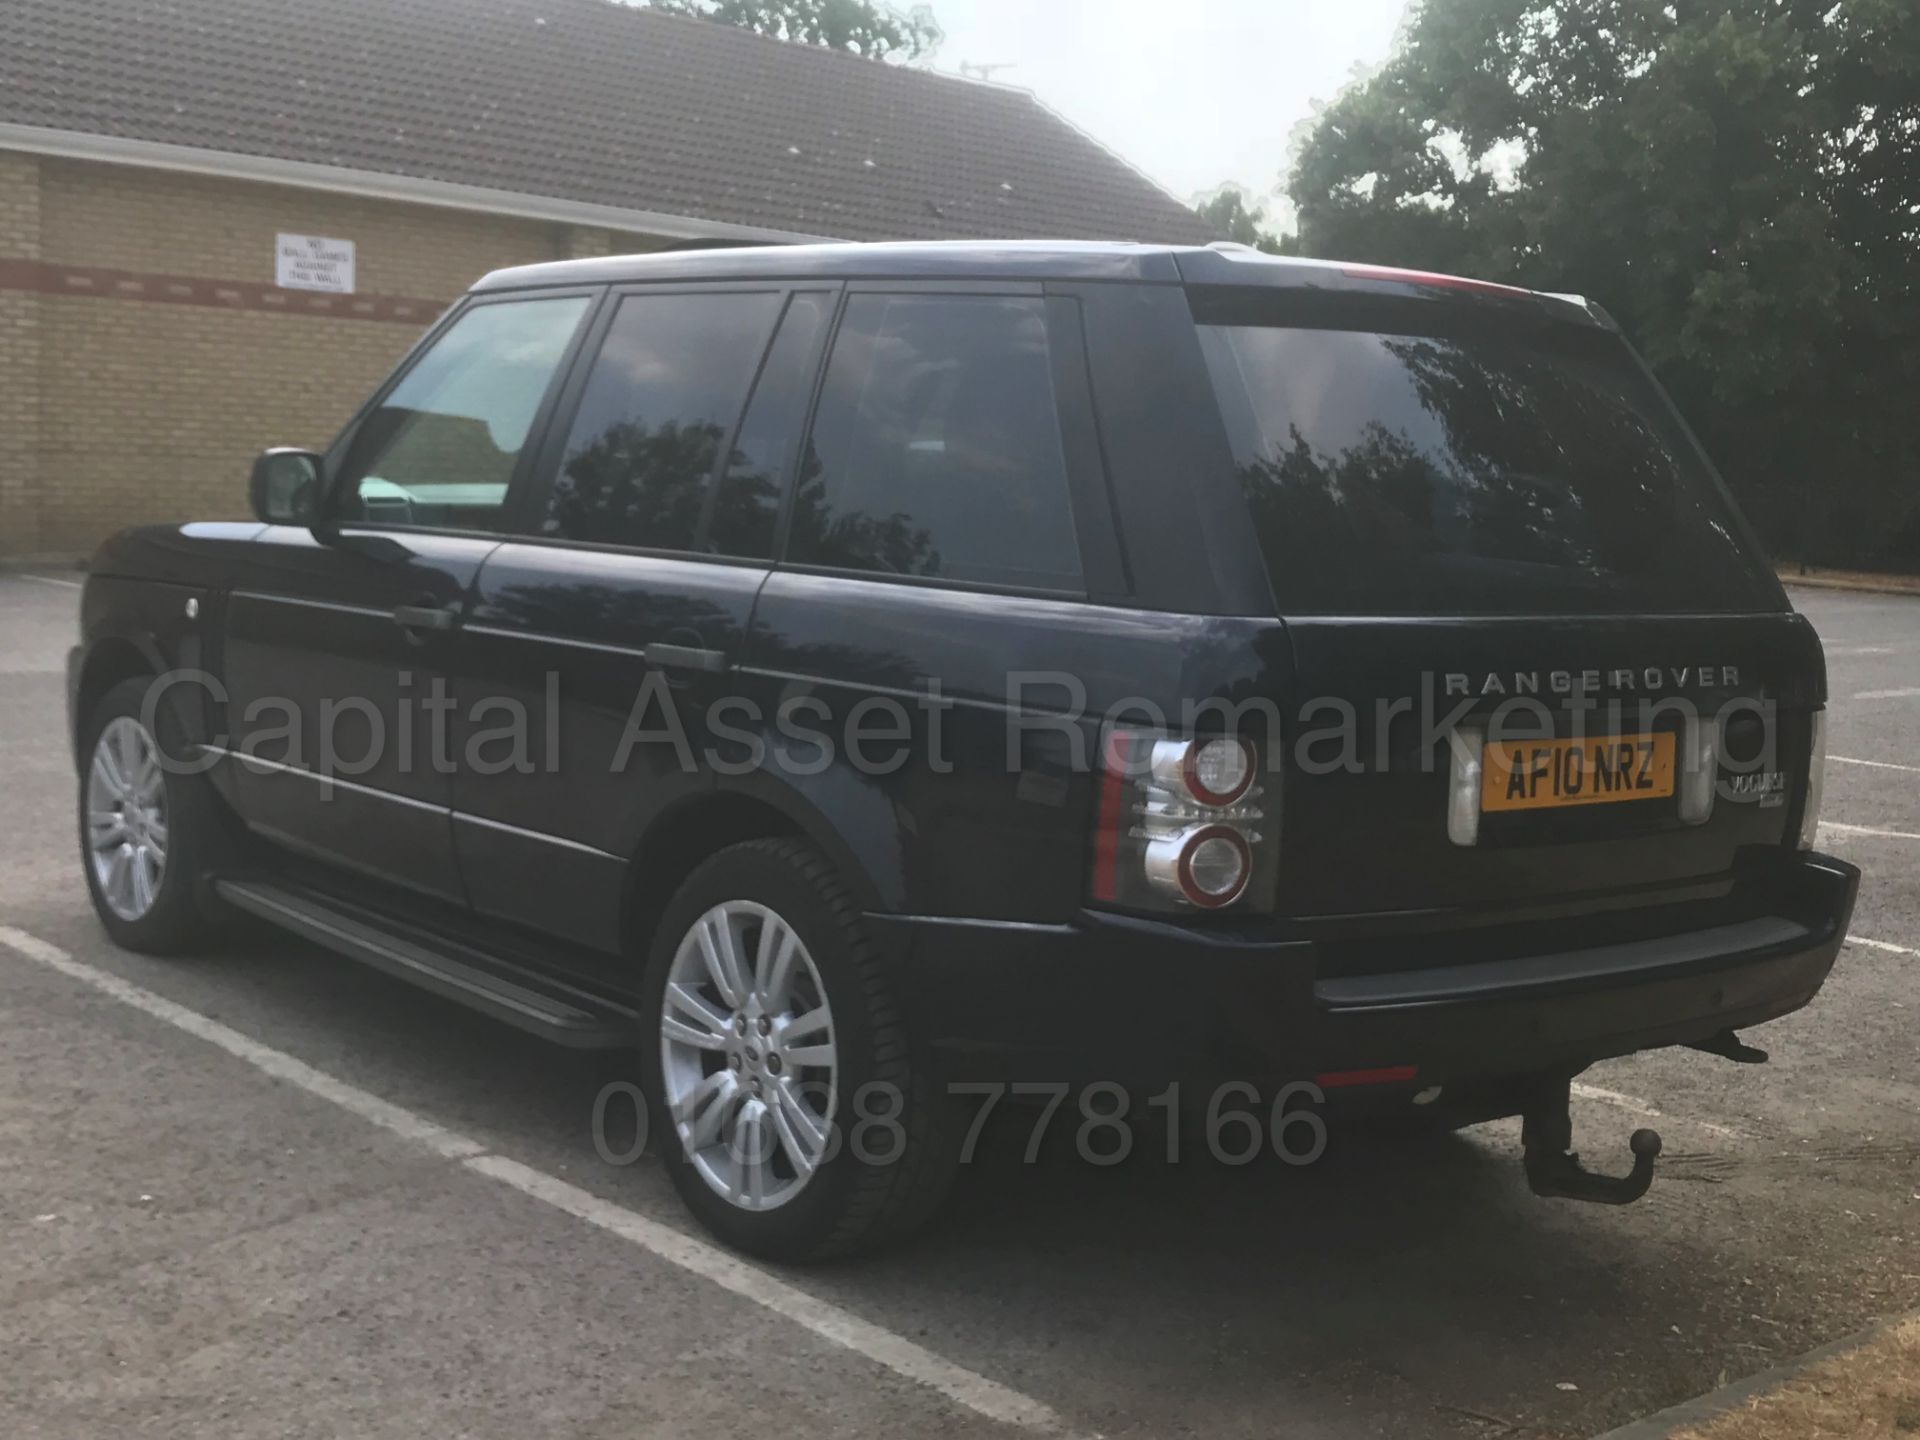 (On Sale) RANGE ROVER VOGUE **SE EDITION** (2010 - FACELIFT EDITION) 'TDV8 - 268 BHP - AUTO' **WOW** - Image 8 of 62